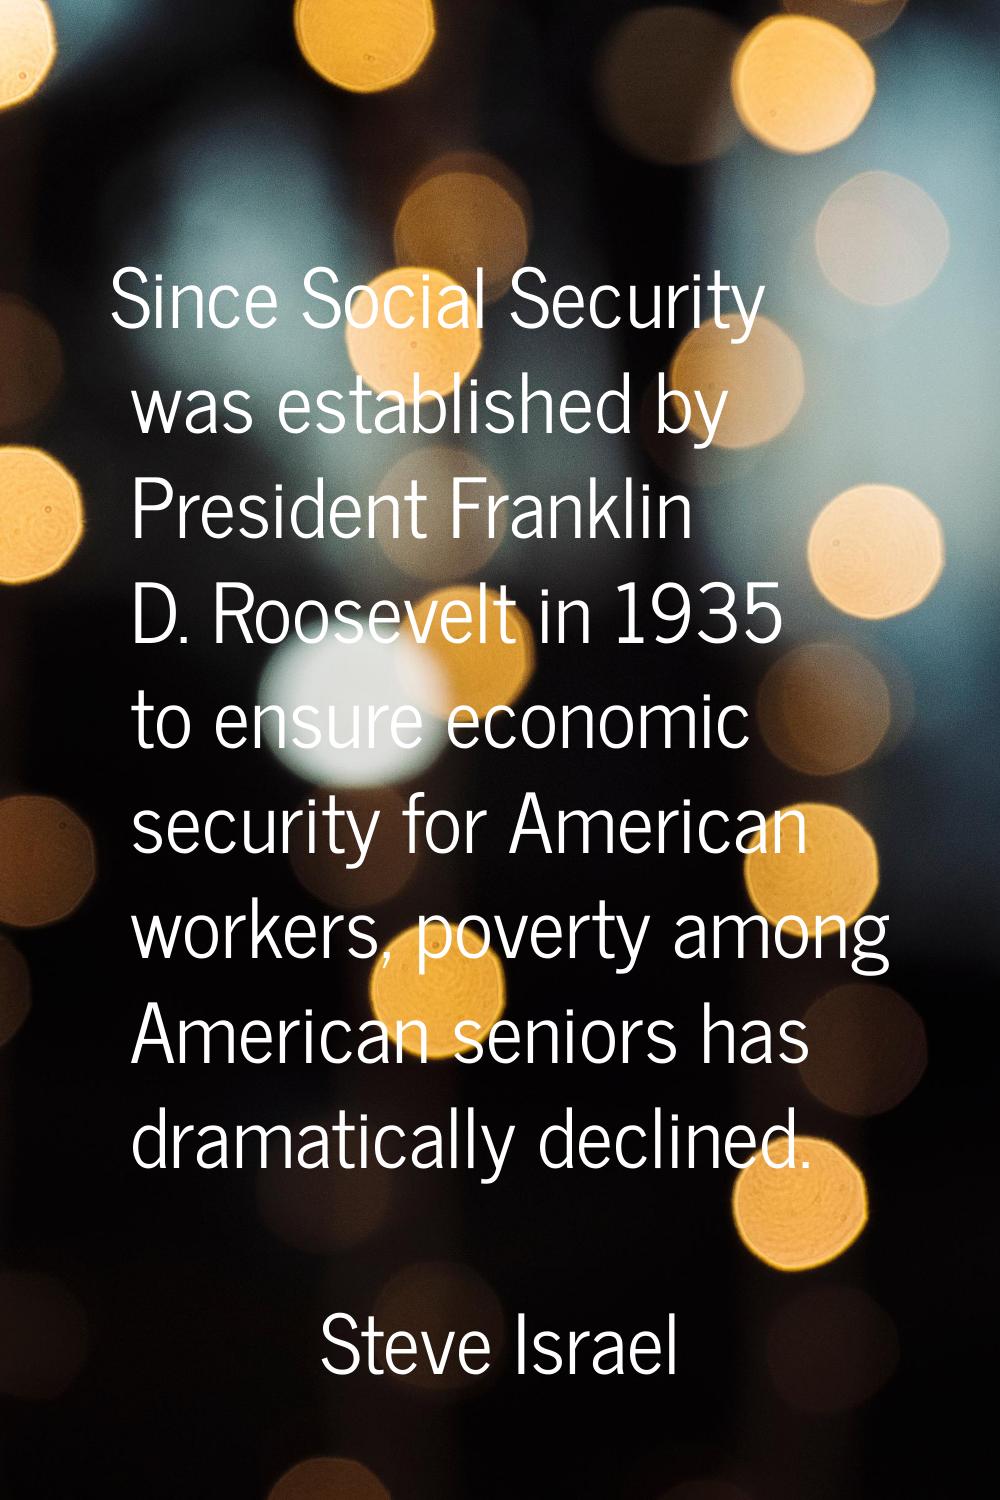 Since Social Security was established by President Franklin D. Roosevelt in 1935 to ensure economic